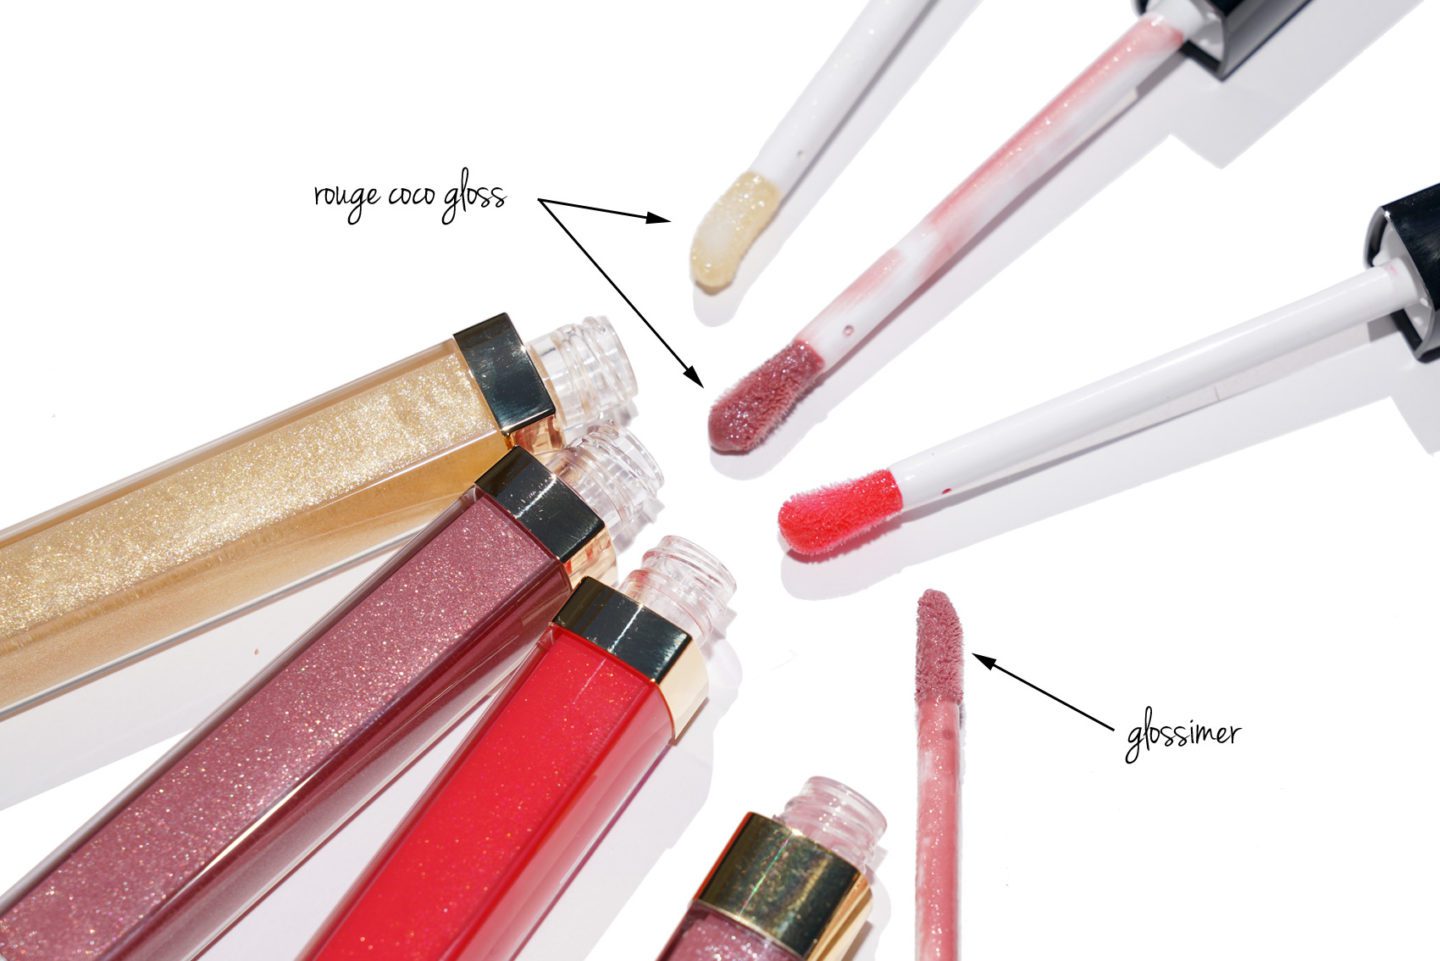 Chanel Rouge Coco Gloss vs Glossimer Tips | The Beauty Look Book